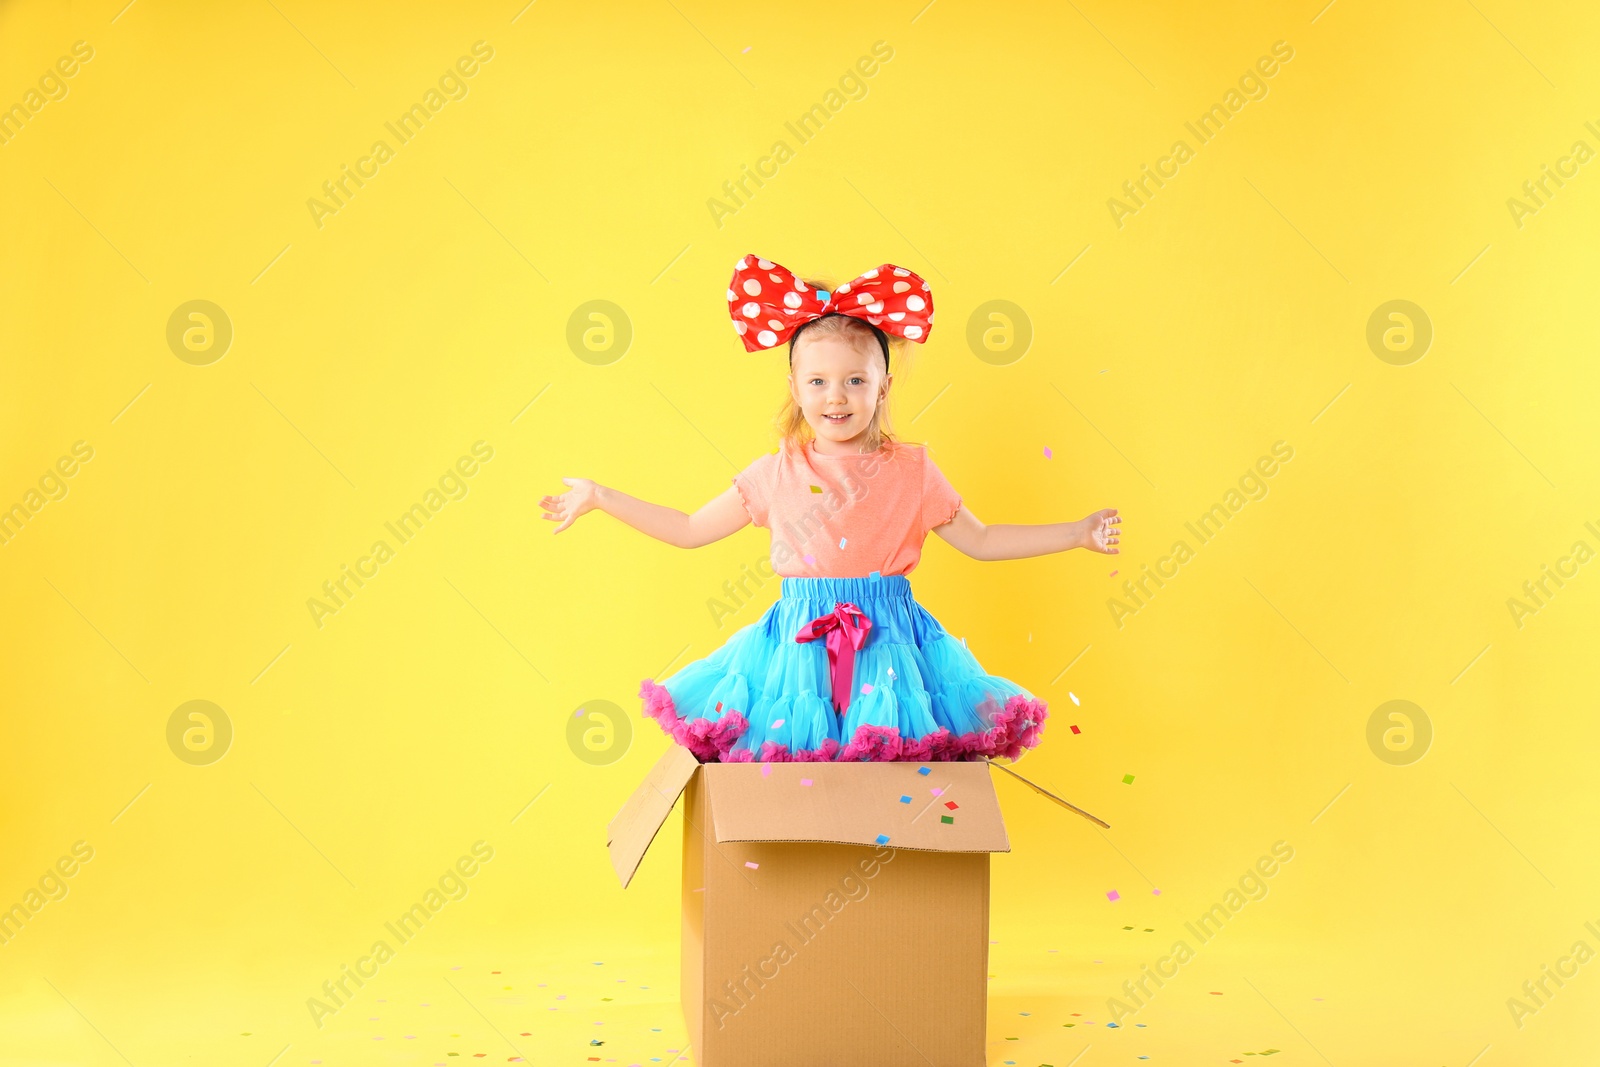 Photo of Little girl with large bow in cardboard box under confetti shower on yellow background. April fool's day